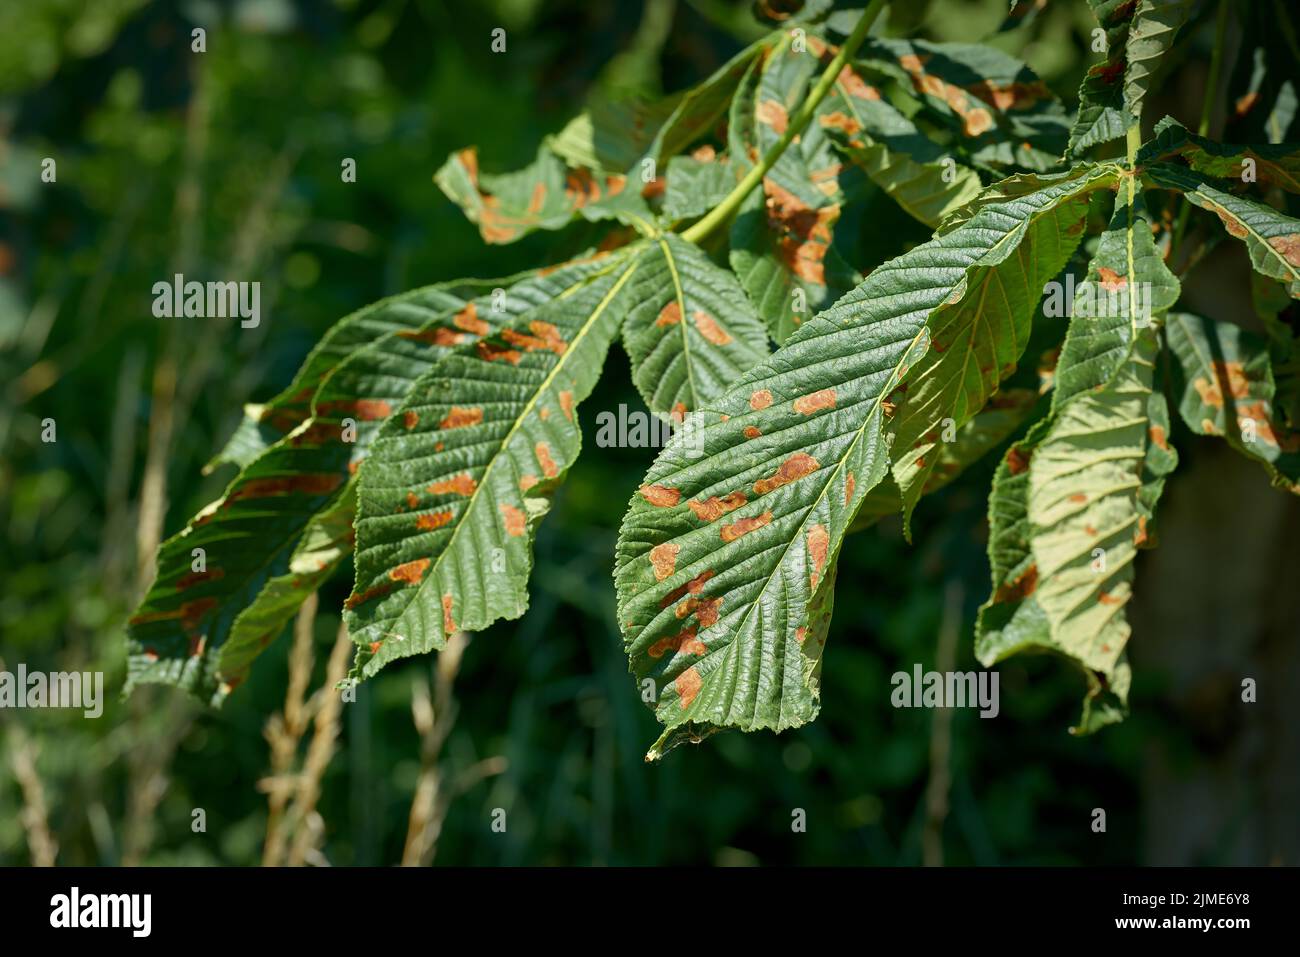 Leaves of a horse chestnut damaged by the leaf miner (Cameraria ohridella) in a park in Germany Stock Photo